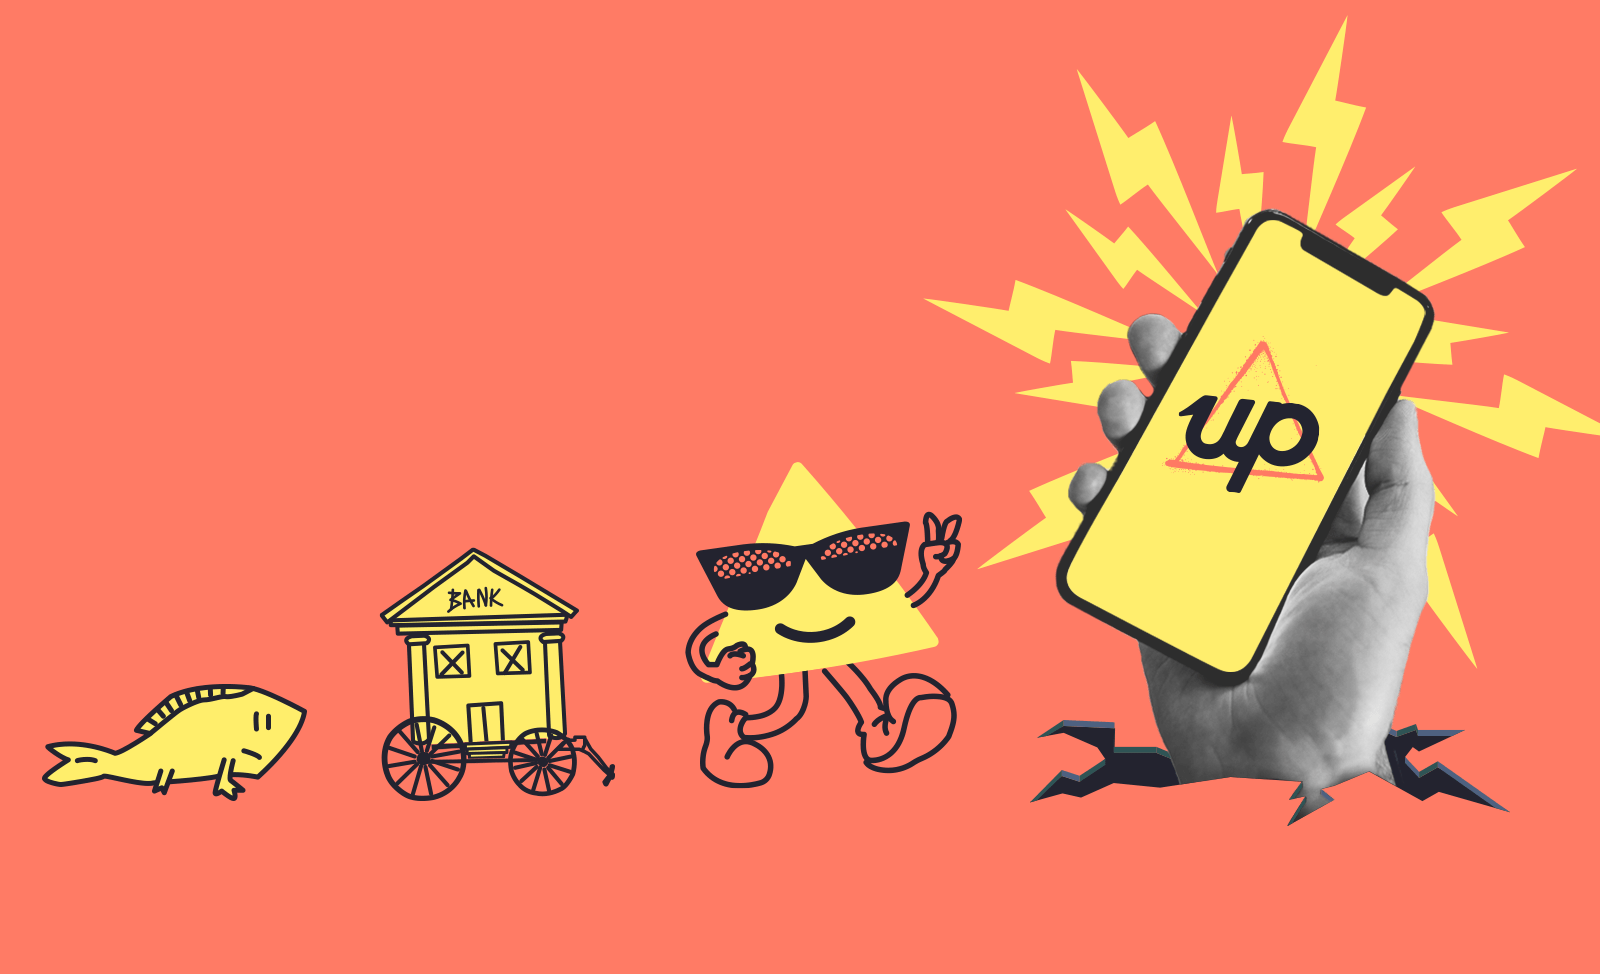 The design journey of the Up app